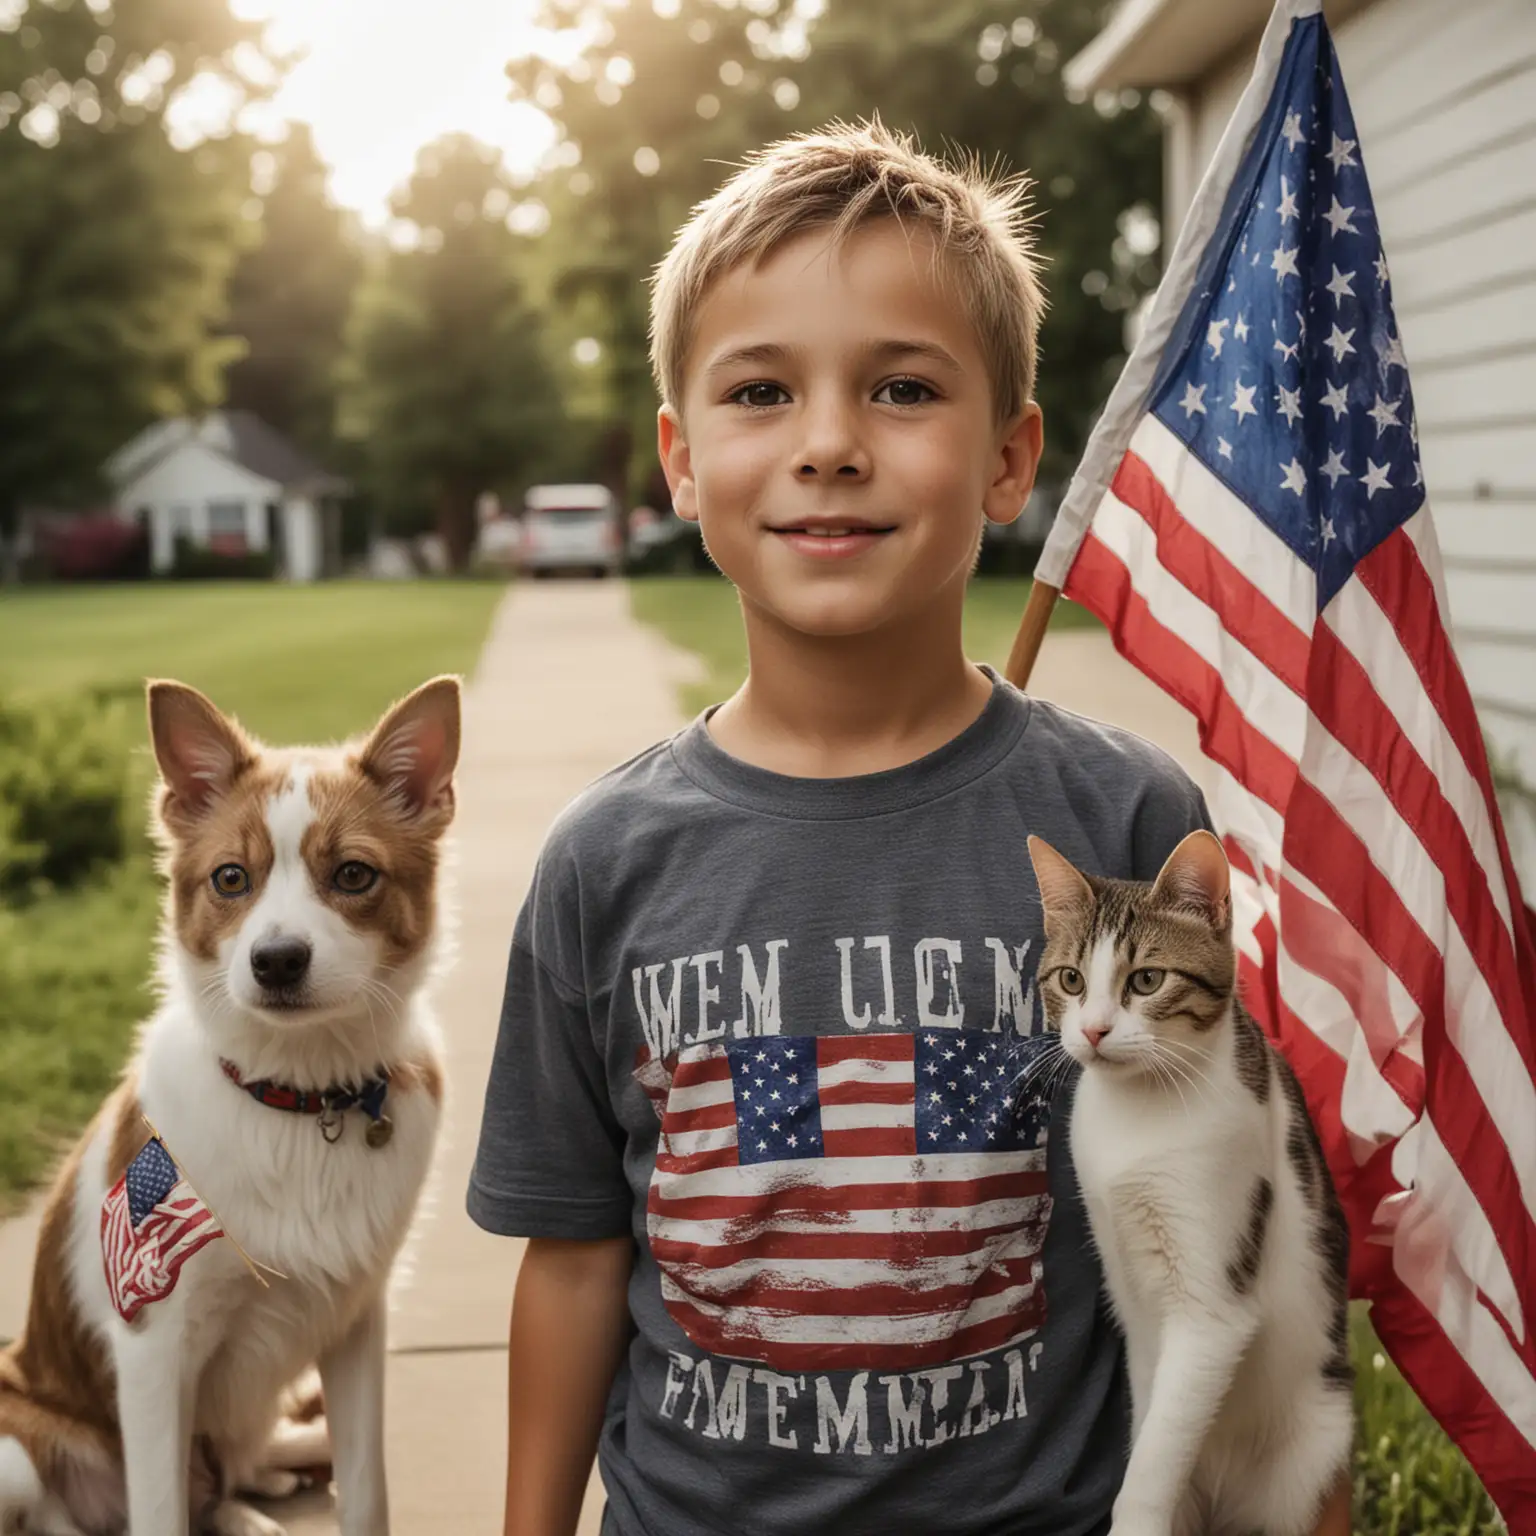 Young Boy with American Flag Shirt Playing Outdoors with Dog and Cat